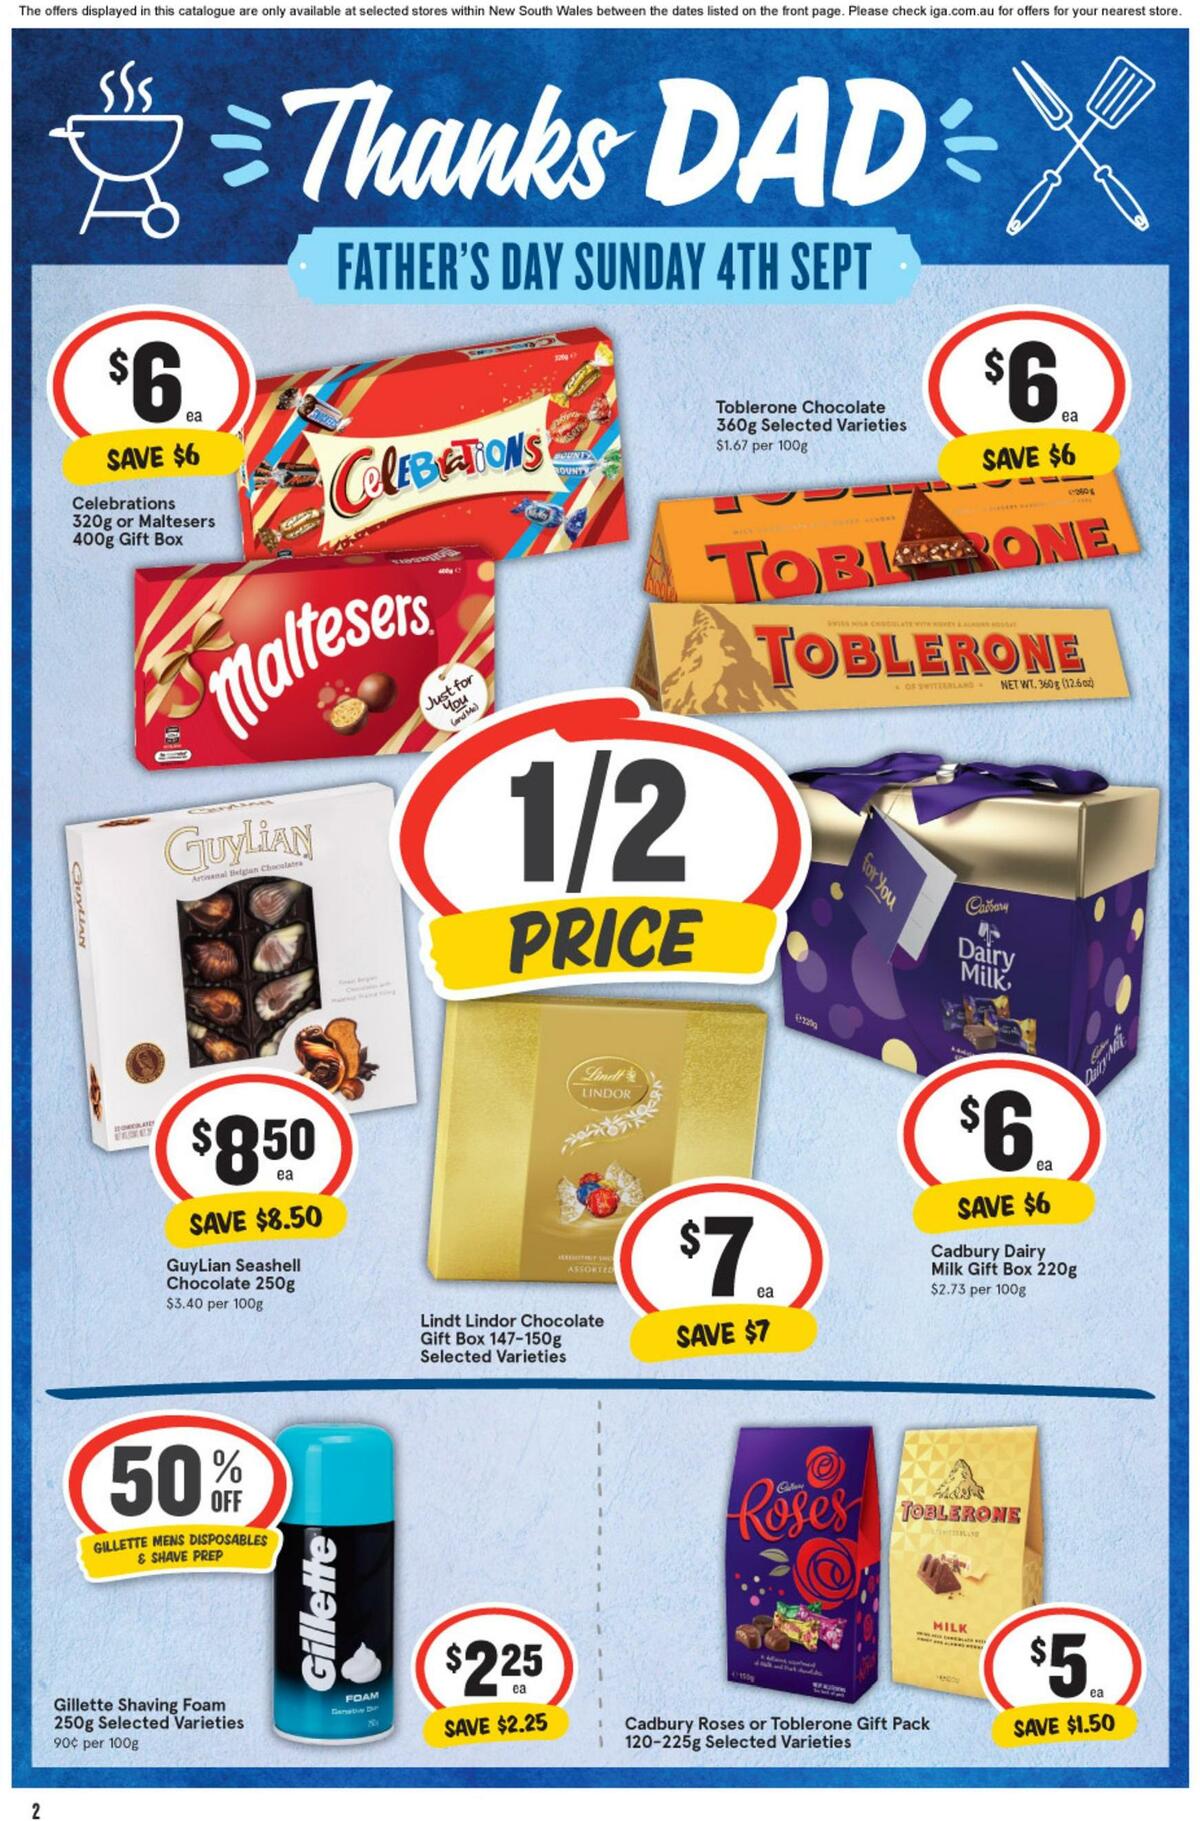 IGA Catalogues from 31 August